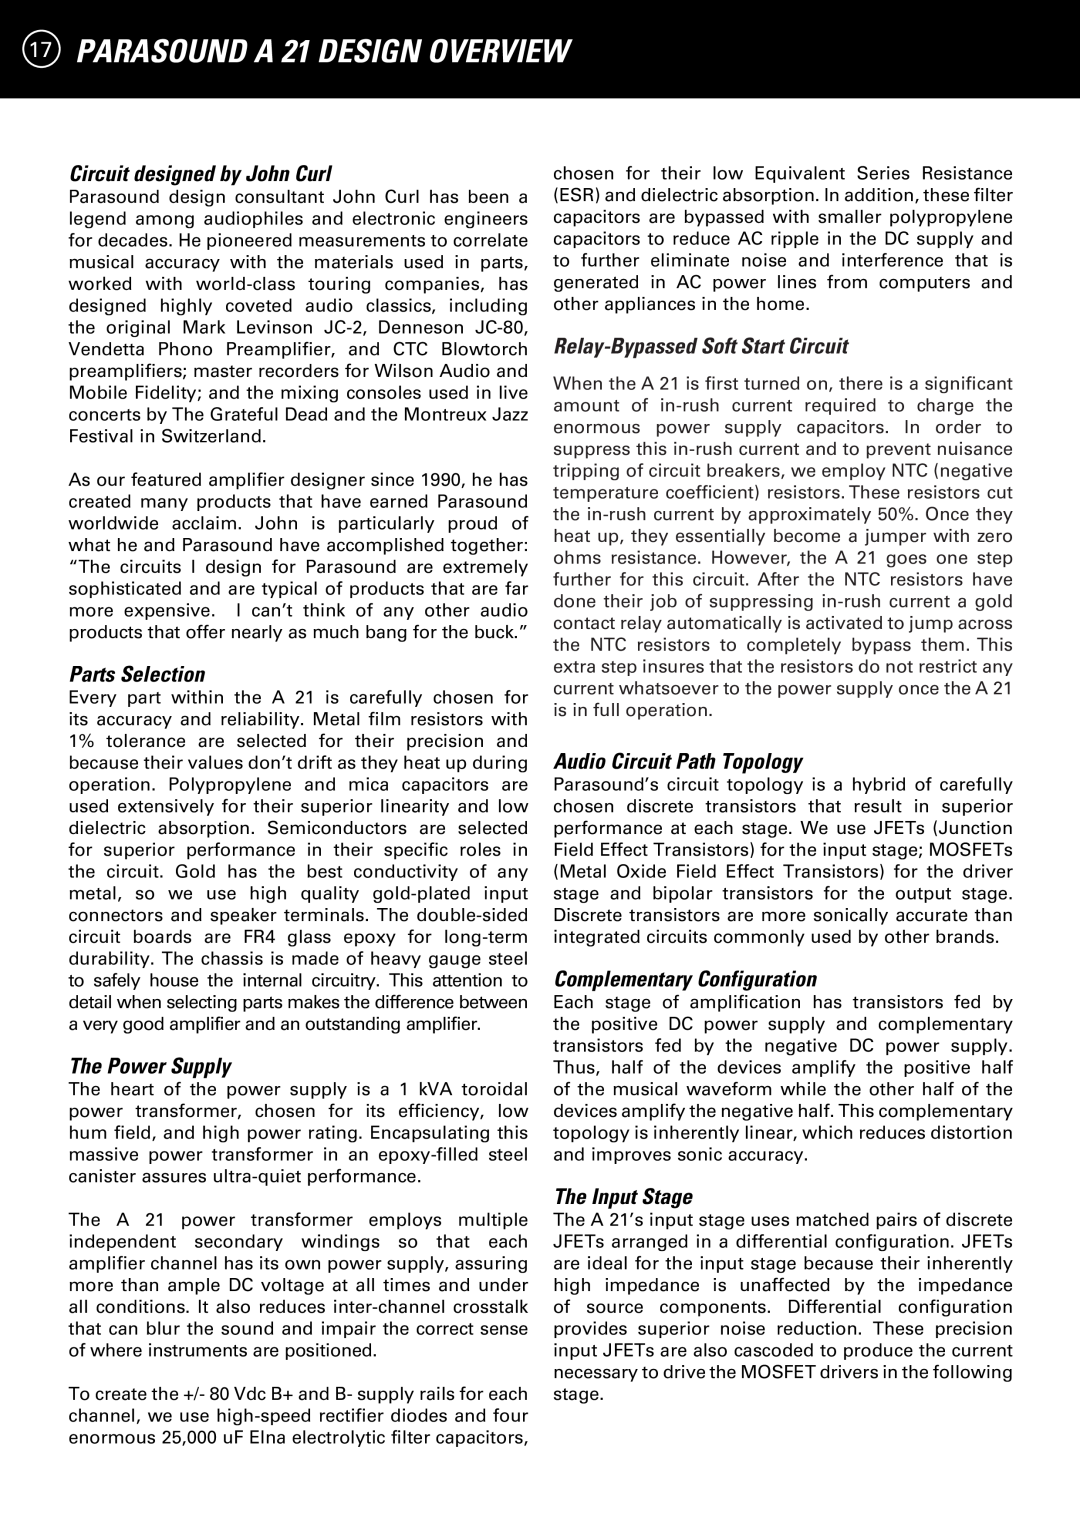 Parasound manual 17PARASOUND A 21 DESIGN OVERVIEW, Circuit designed by John Curl, Parts Selection, The Power Supply 